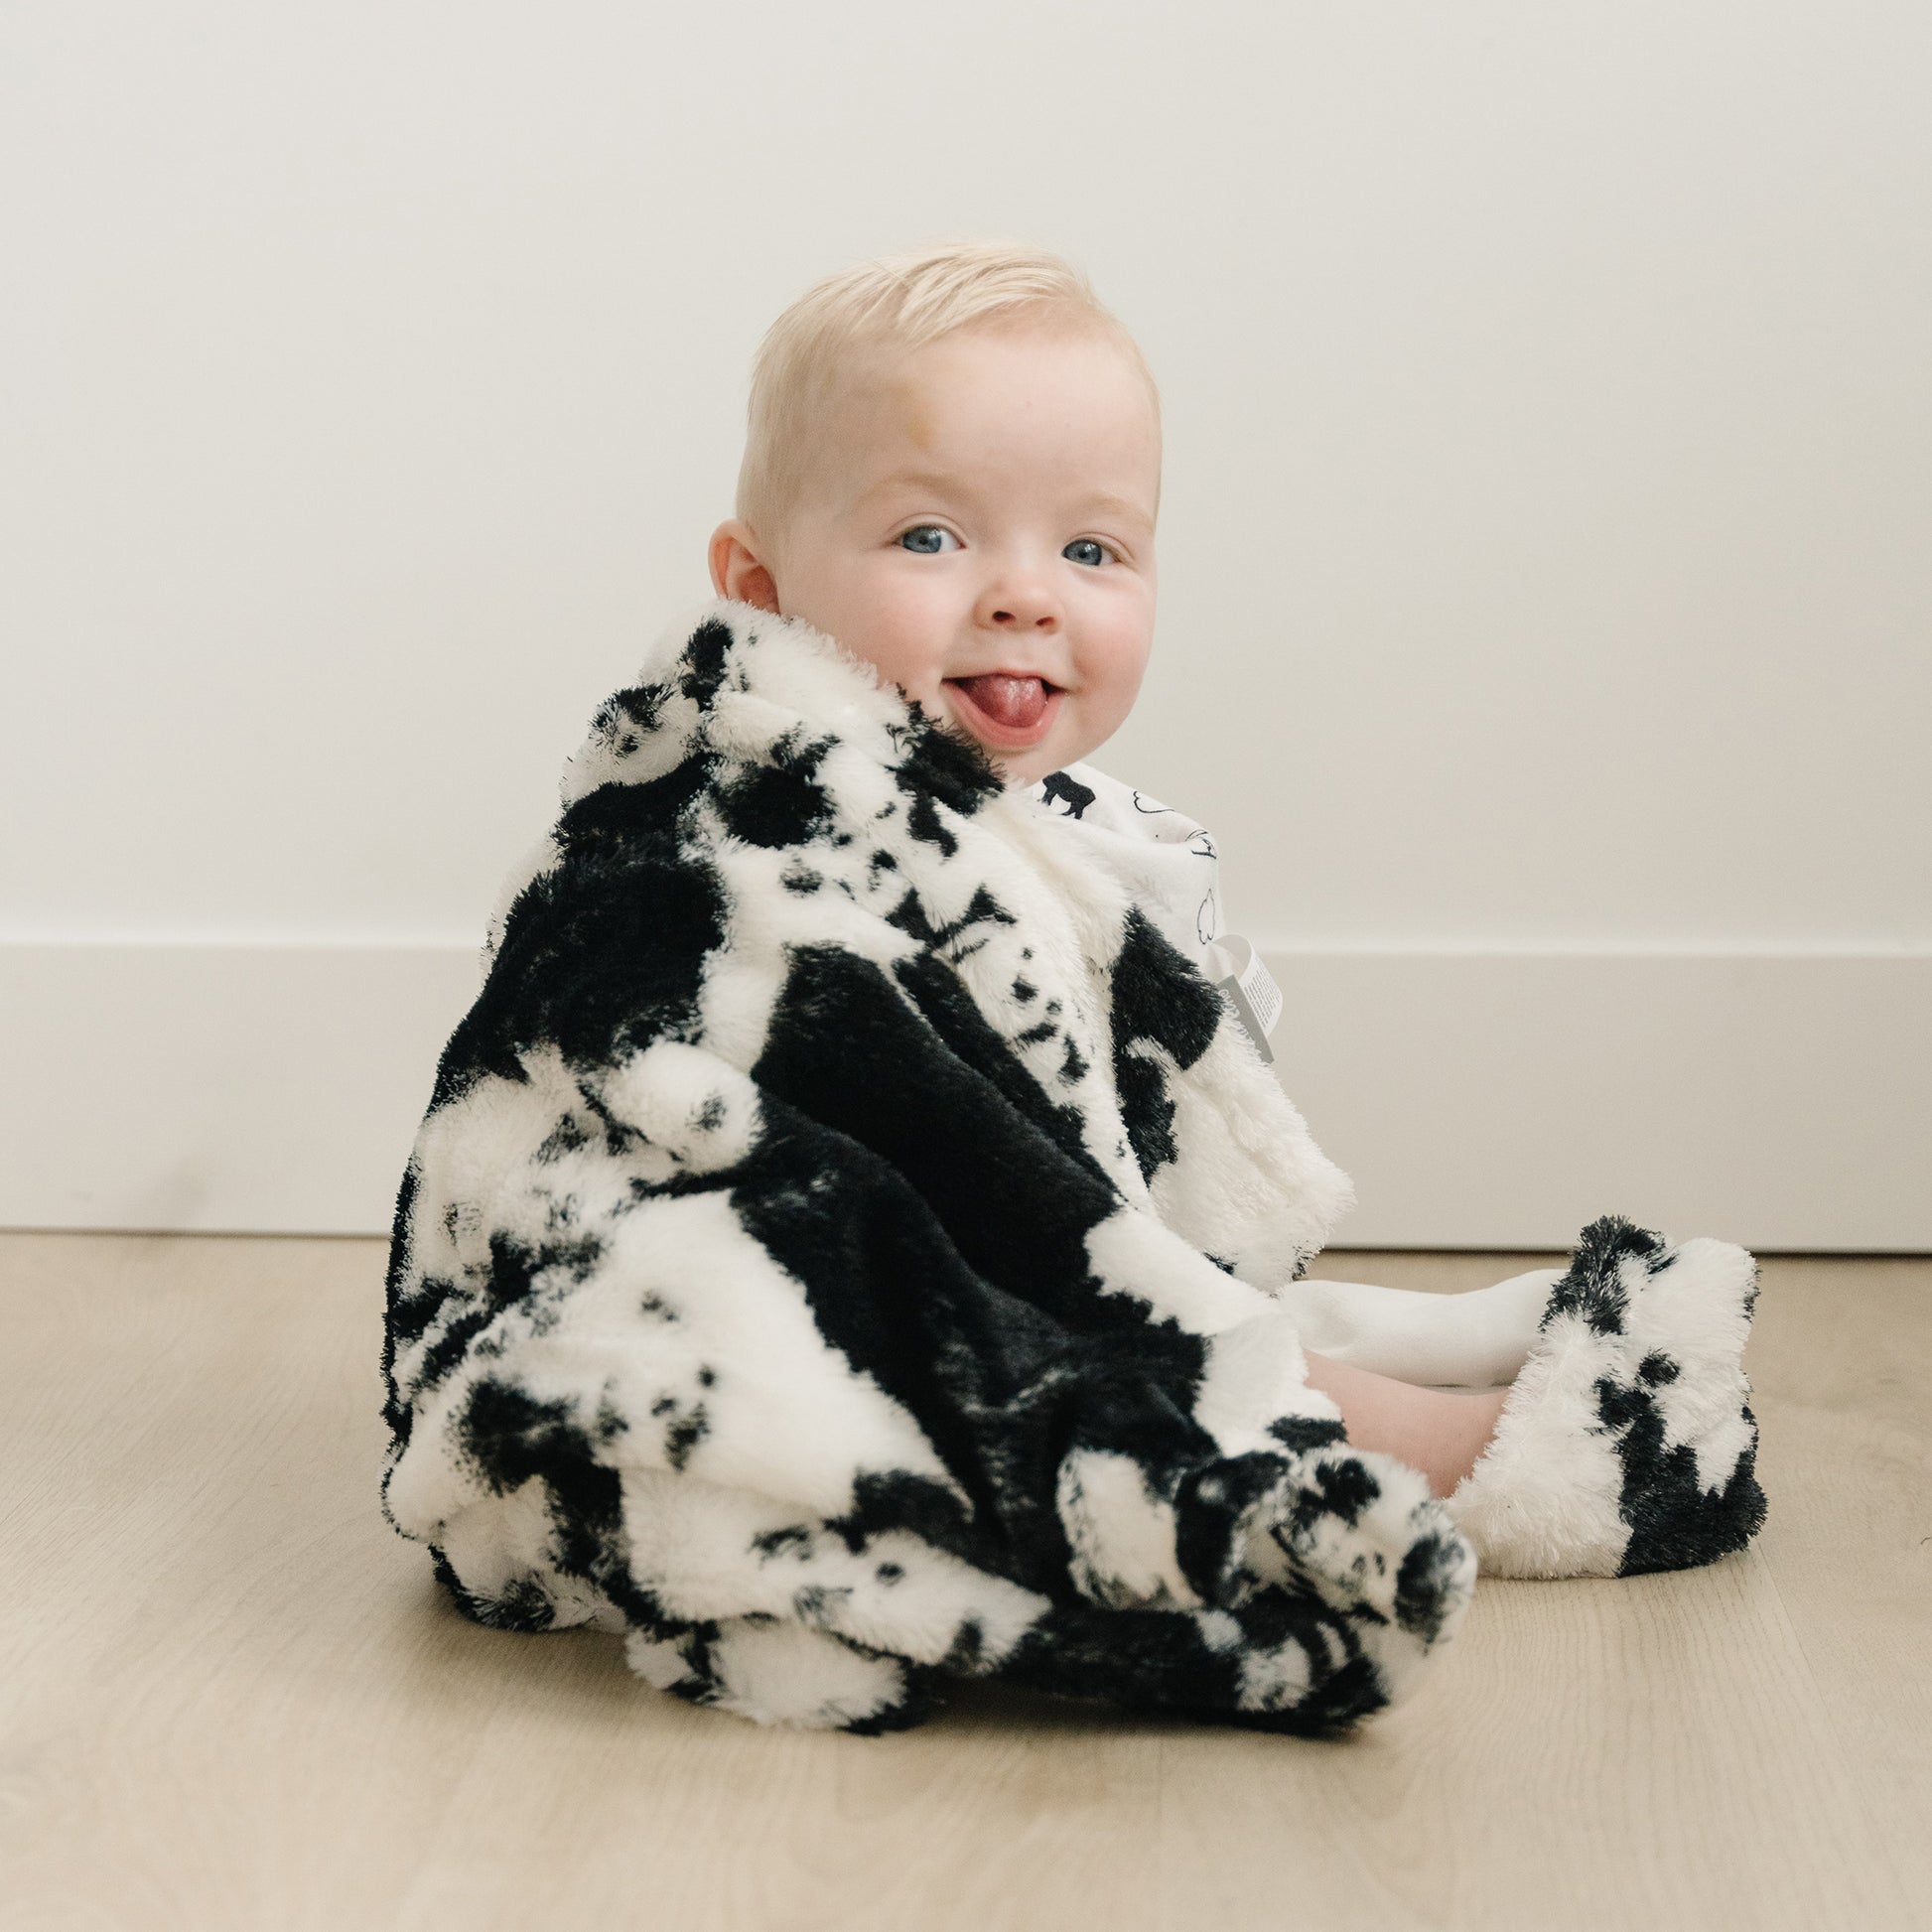  Cow Print Plush Baby Blanket ; stylized room image with model